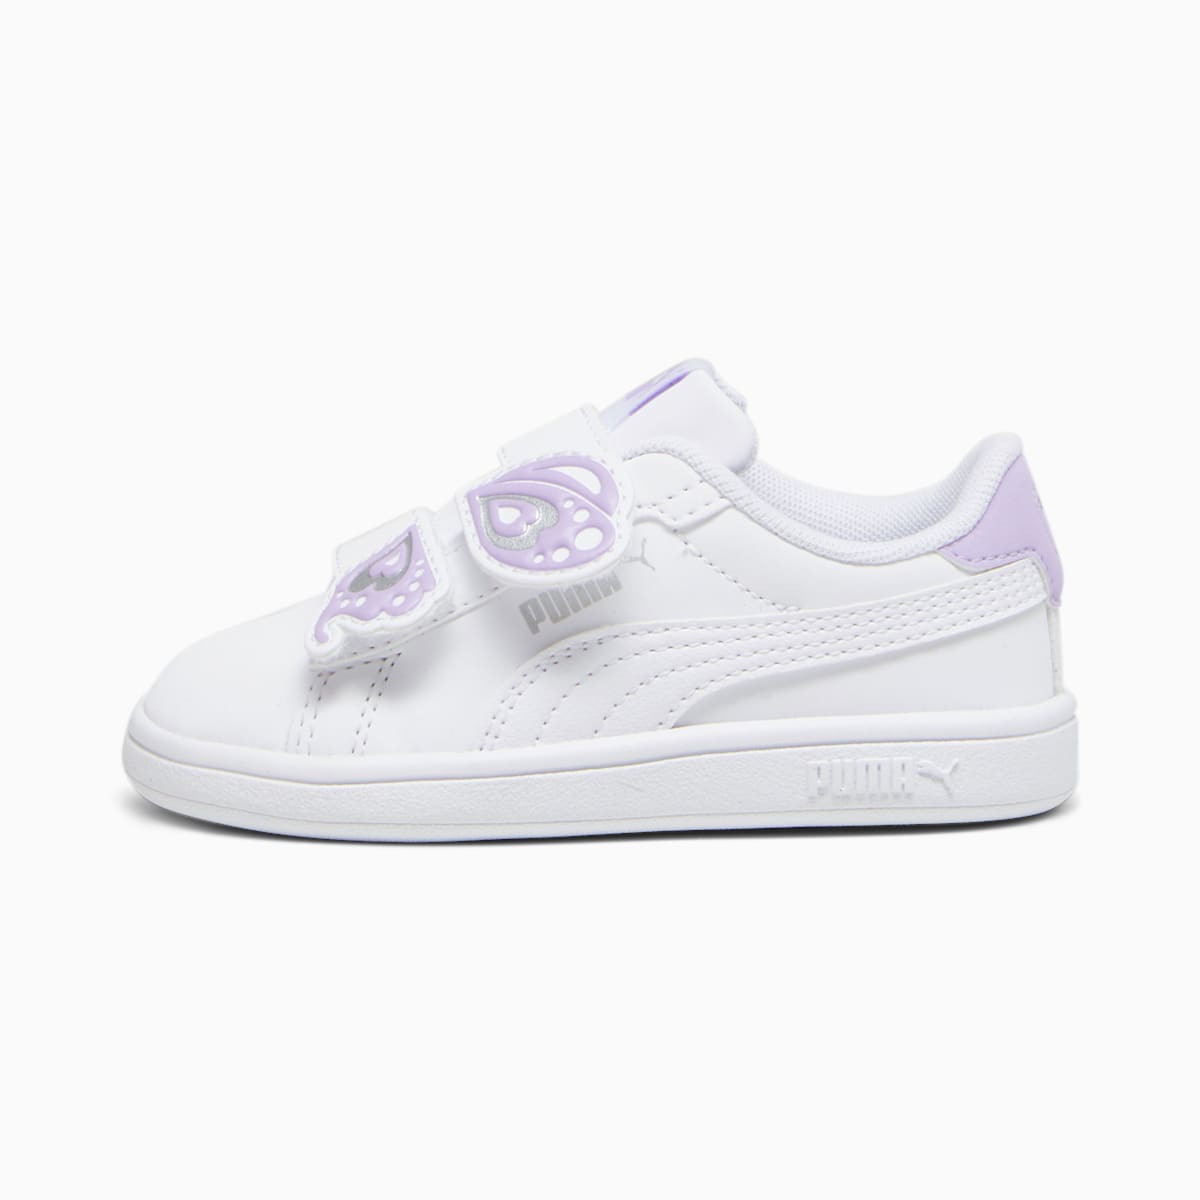 PUMA Smash 3.0 Butterfly Toddlers' Sneakers